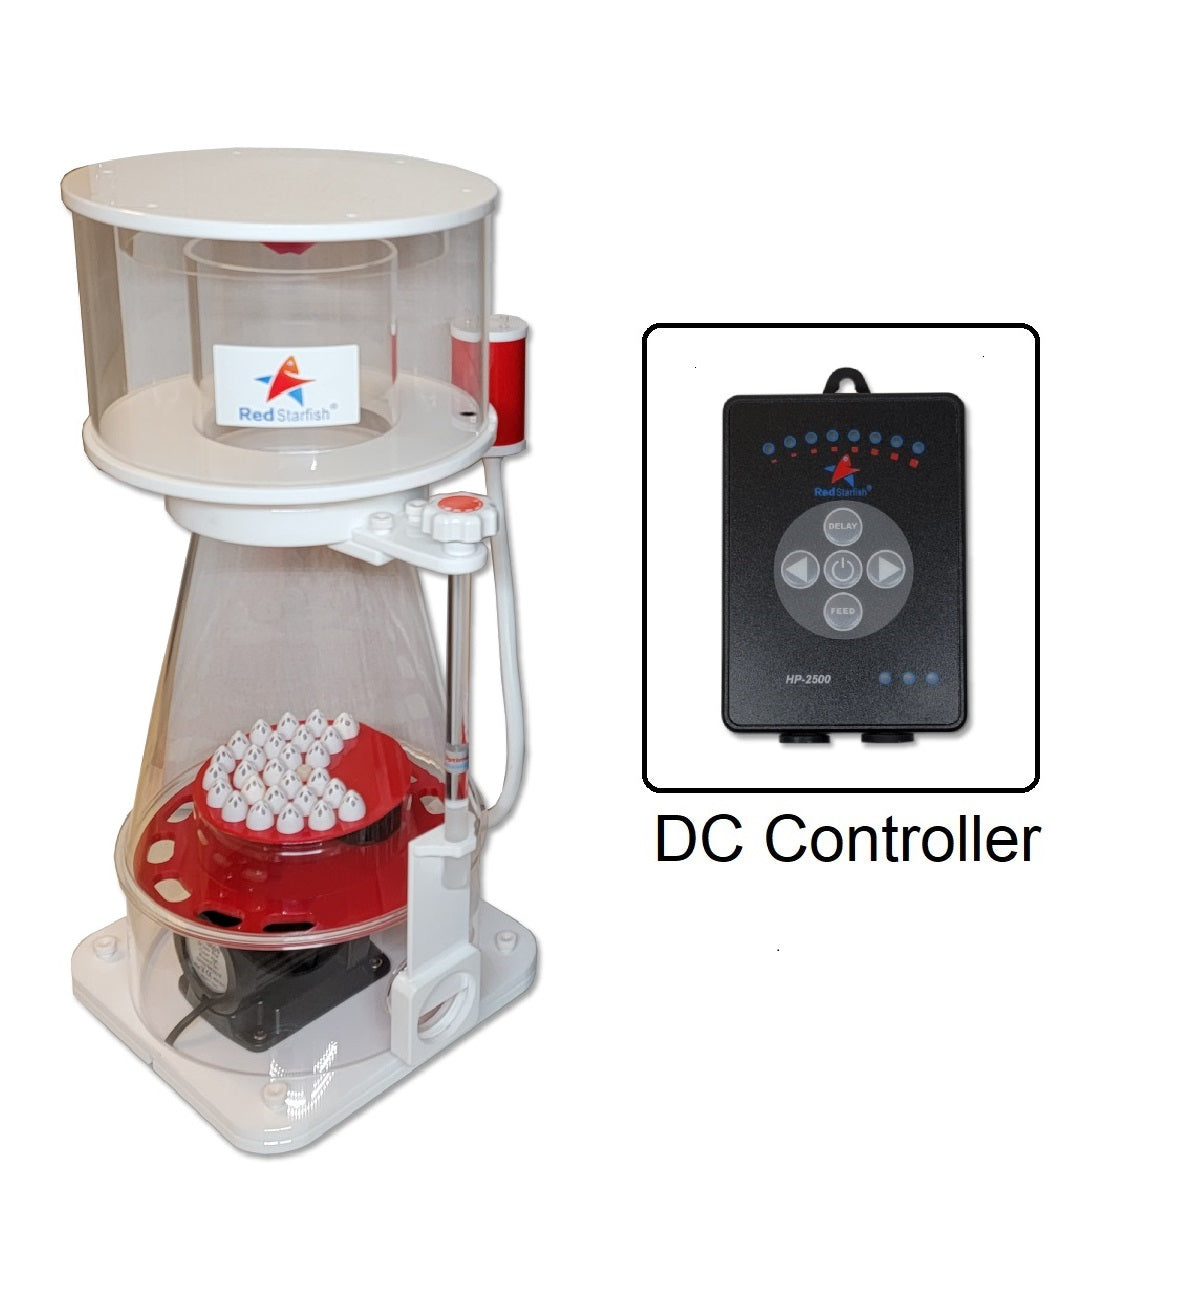 Red Star Fish RS-C7+ DC Protein Skimmer